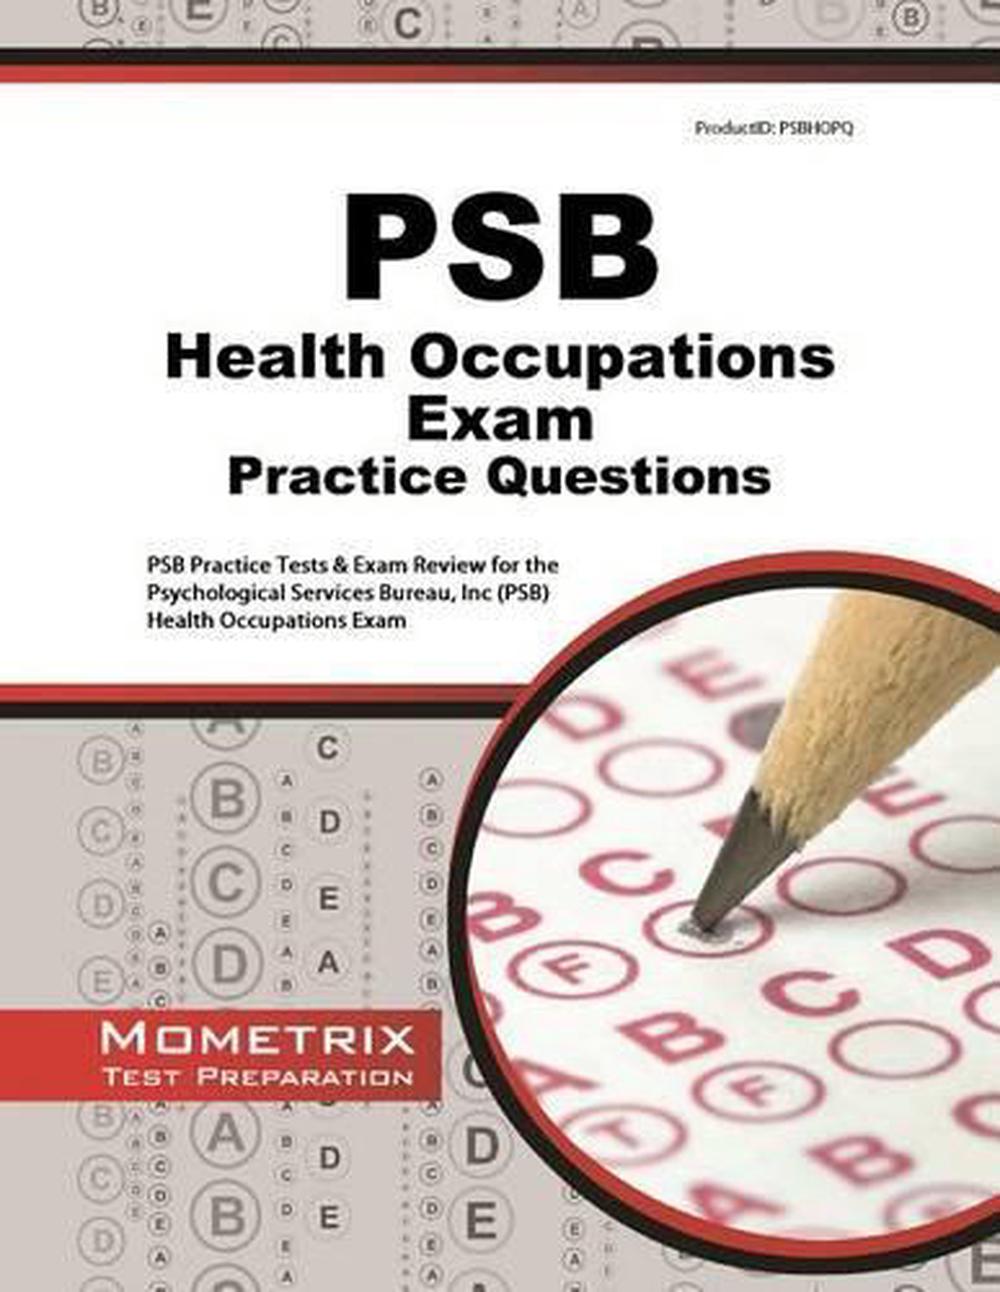 psb-health-occupations-exam-practice-questions-psb-practice-tests-review-for-9781627332170-ebay